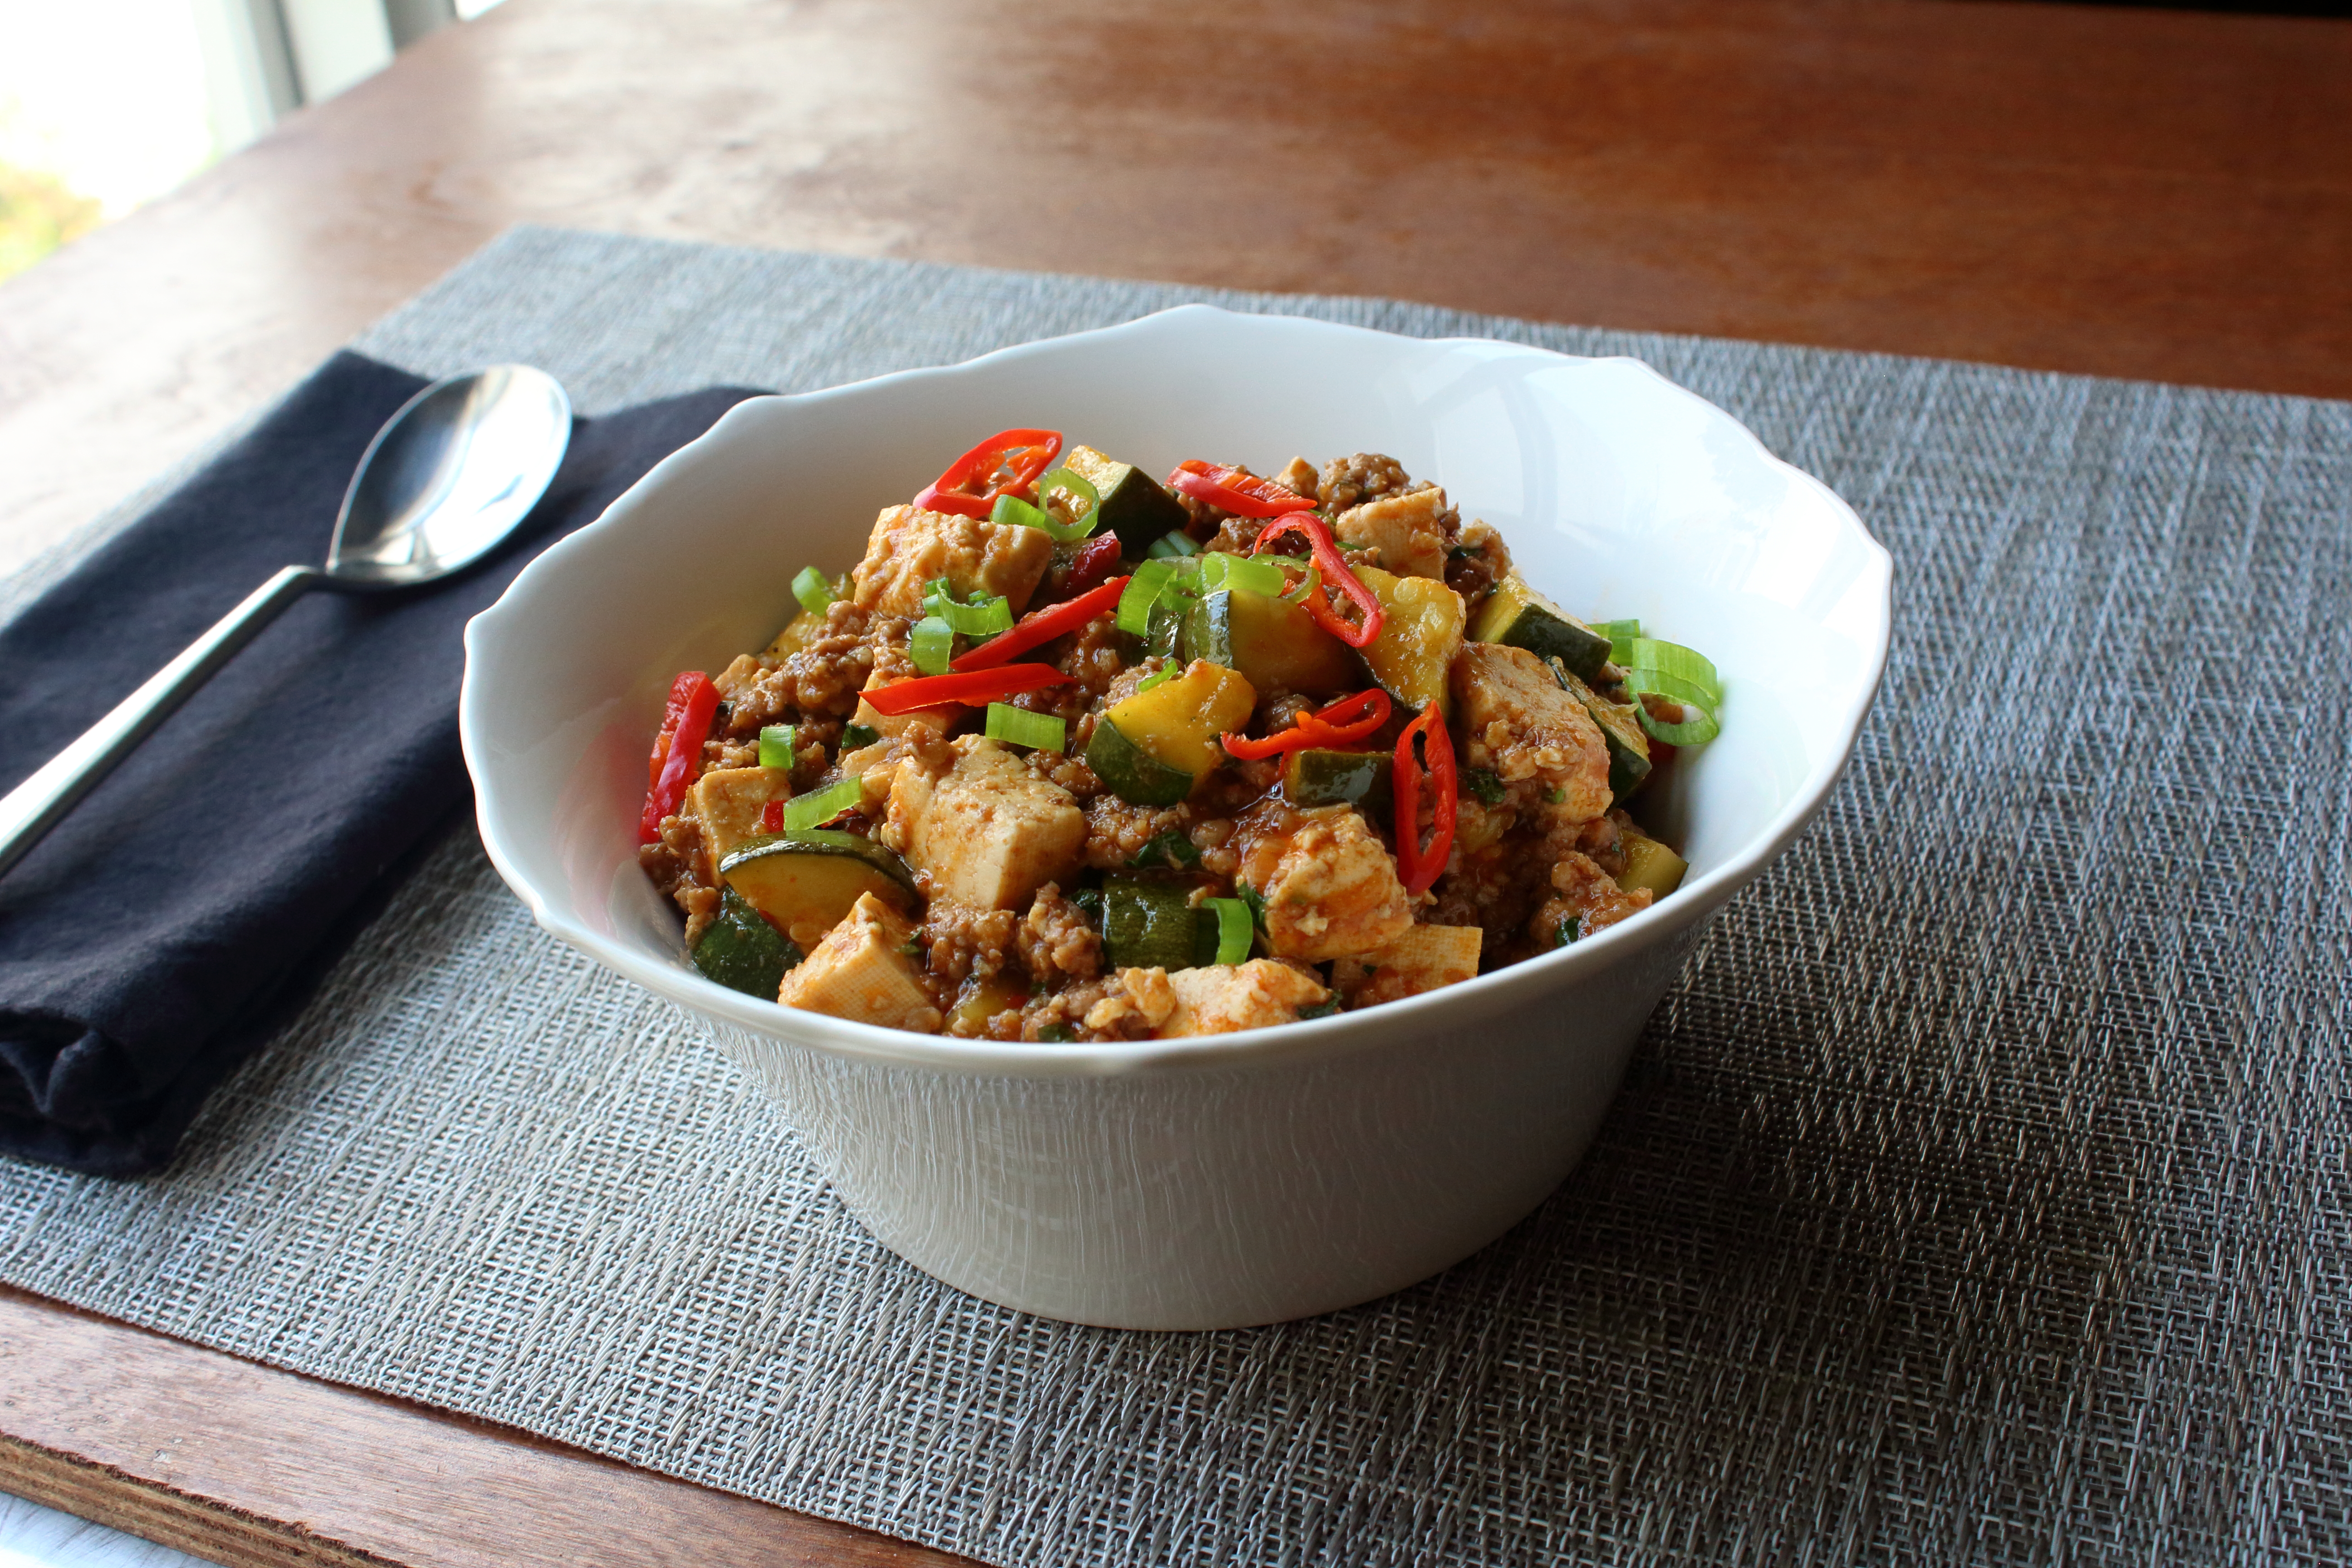 Spicy Pork and Vegetable Tofu